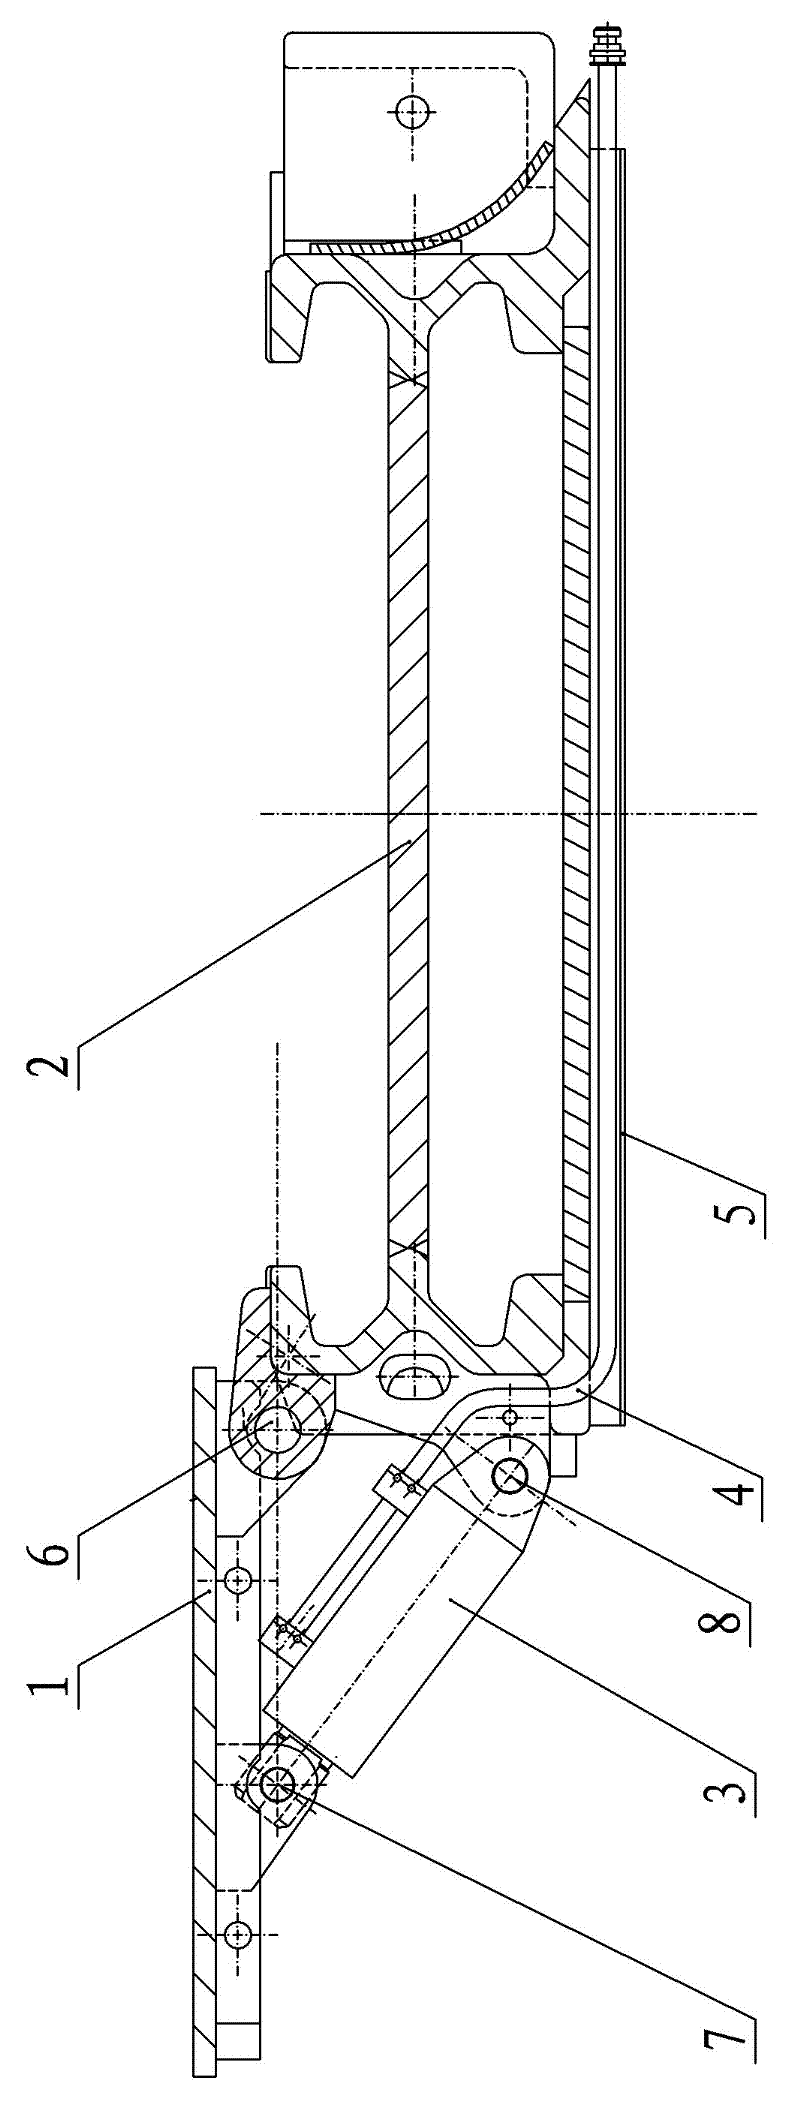 Top-coal caving scraper conveyor with movable coal-collecting plate